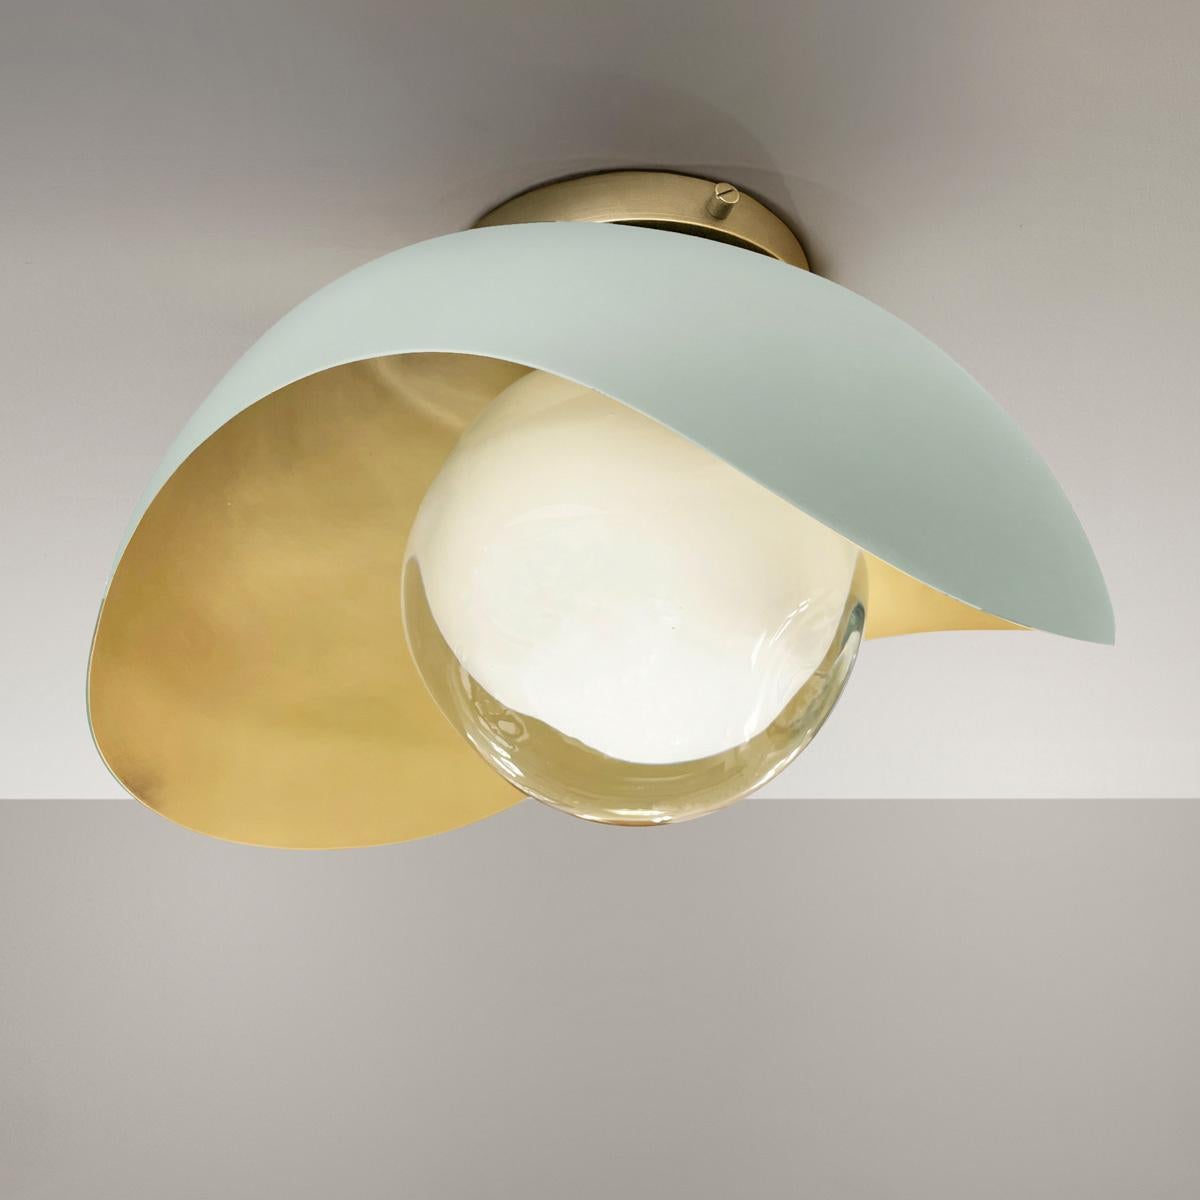 Perla Flushmount Ceiling Light by Gaspare Asaro-Satin Brass/Polished Nickel For Sale 1